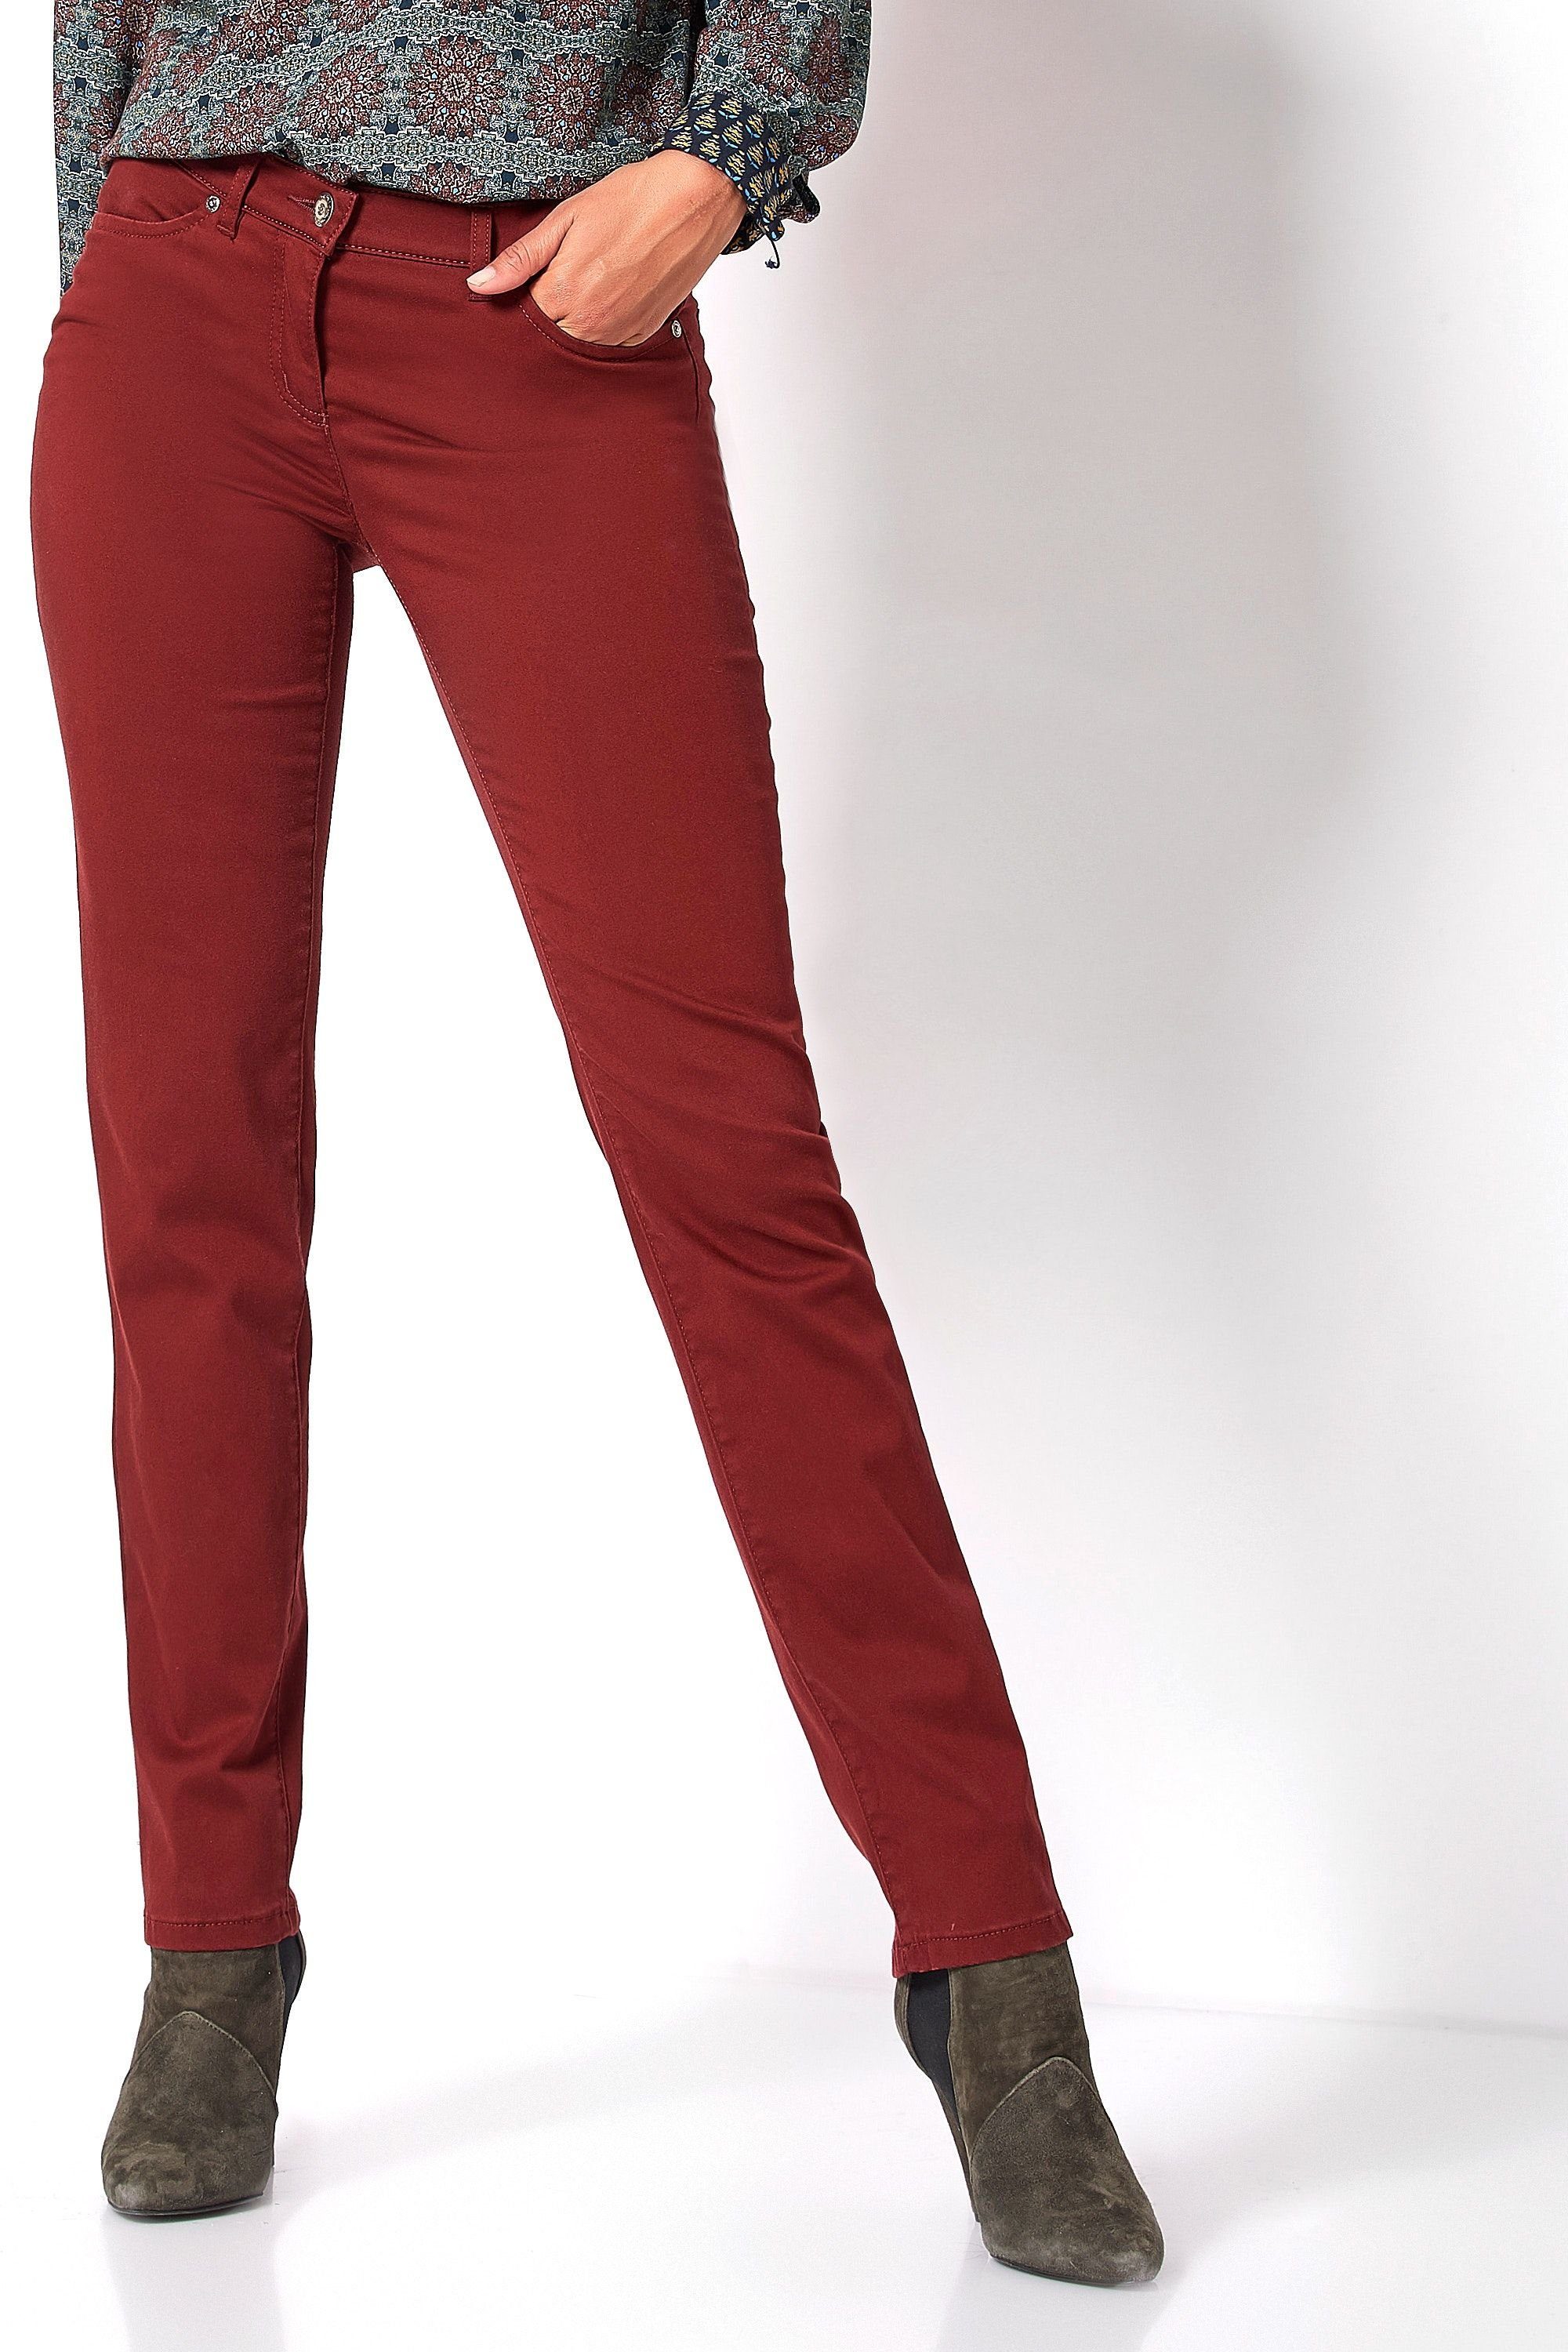 TONI 5-Pocket-Jeans red rusty